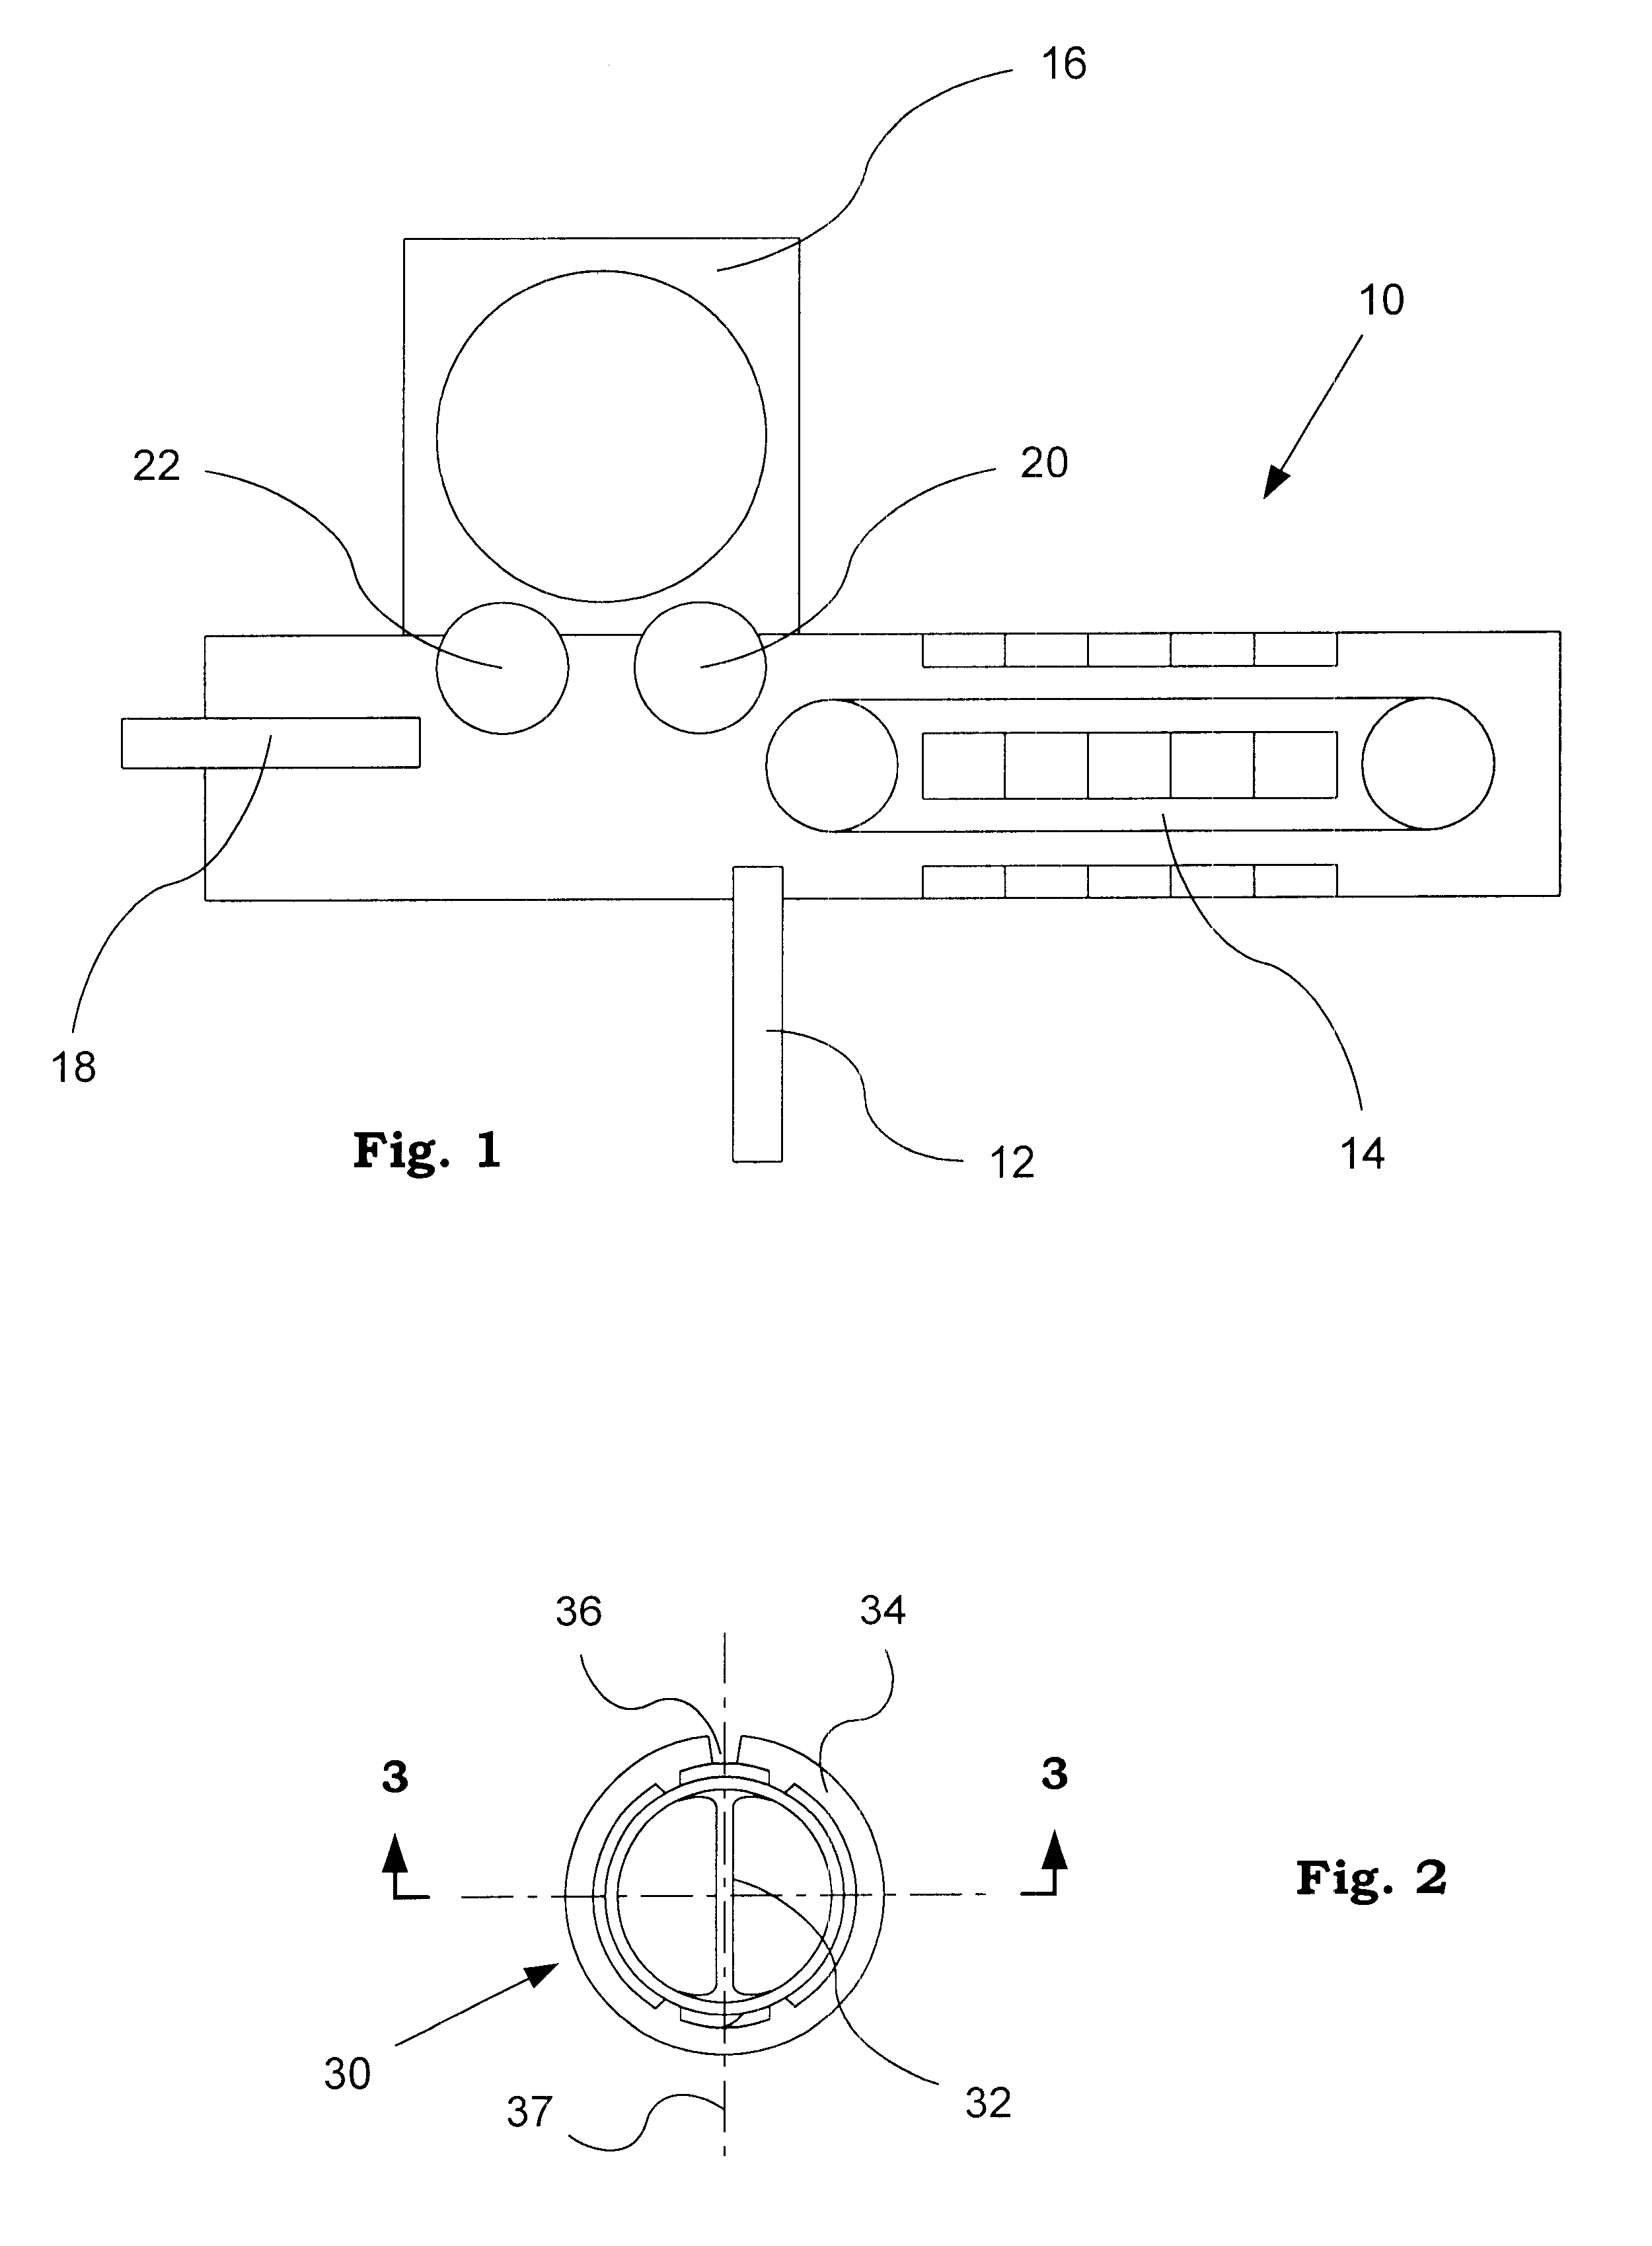 Method for making a carbonated soft drink bottle with an internal web and hand-grip feature